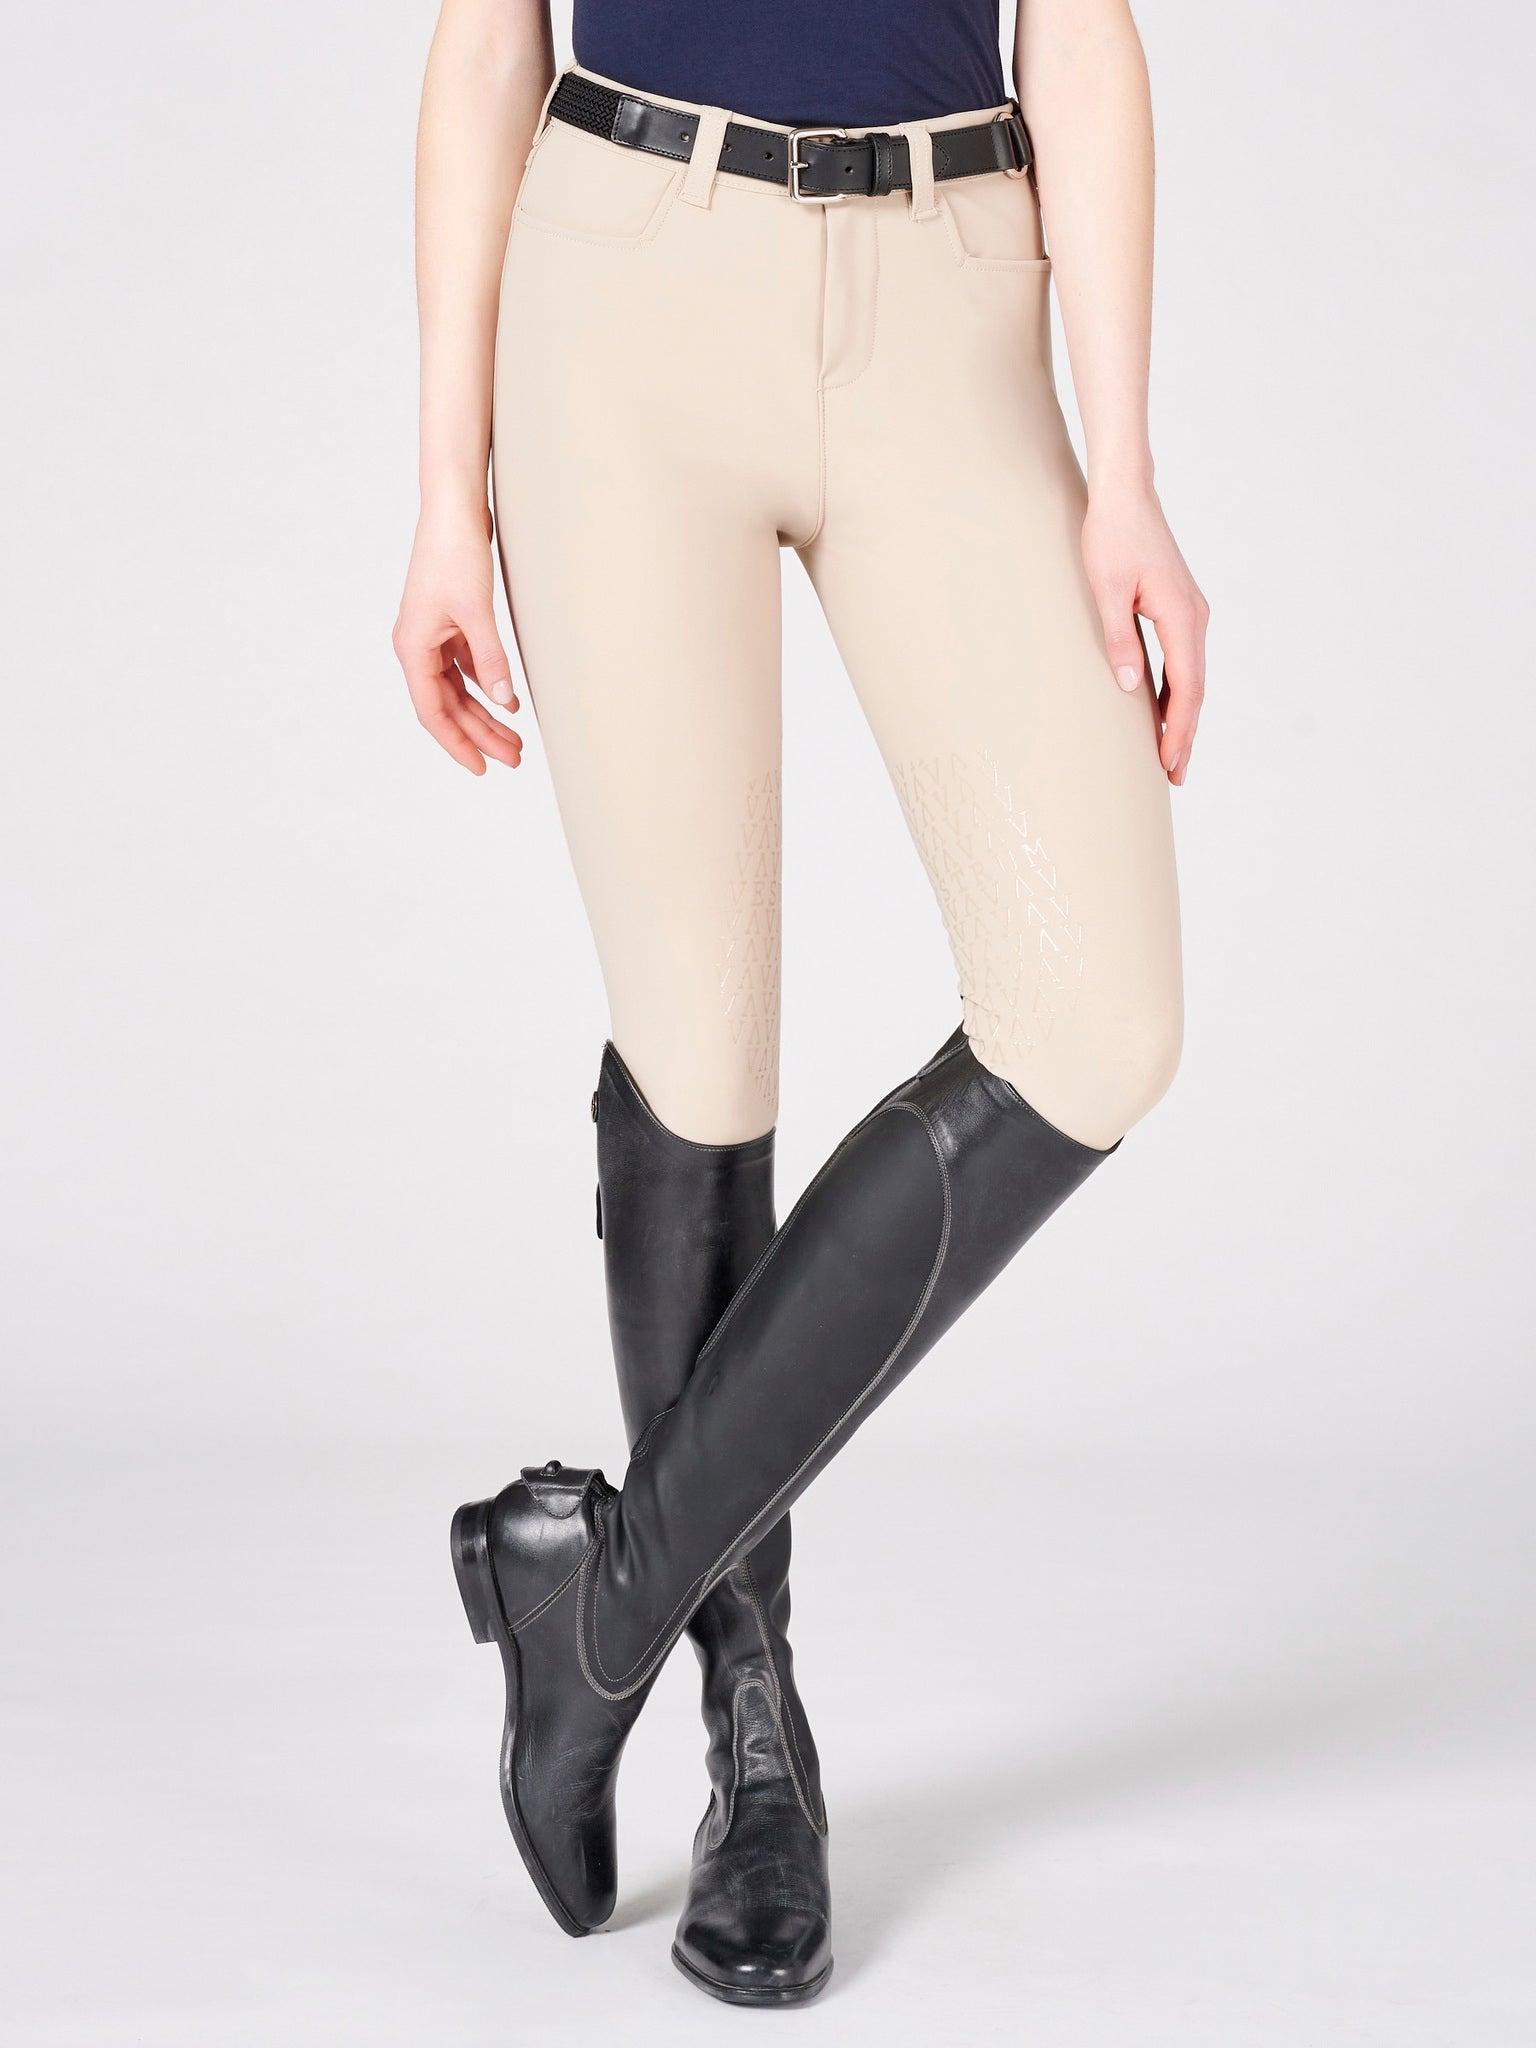 The beige Vestrum Syracuse Sage V Grip Breeches are a timeless and indestructible basic they constantly improve. The bi stretch technical fabric give maximum movement and comfort for the rider. These Vestrum breeches are extremely comfortable and have a flattering fit. These mid wait breeches have two front pockets, no back pockets and a knee grip. The breeches are beige with a dark tan  iconic Vestrum logo. 